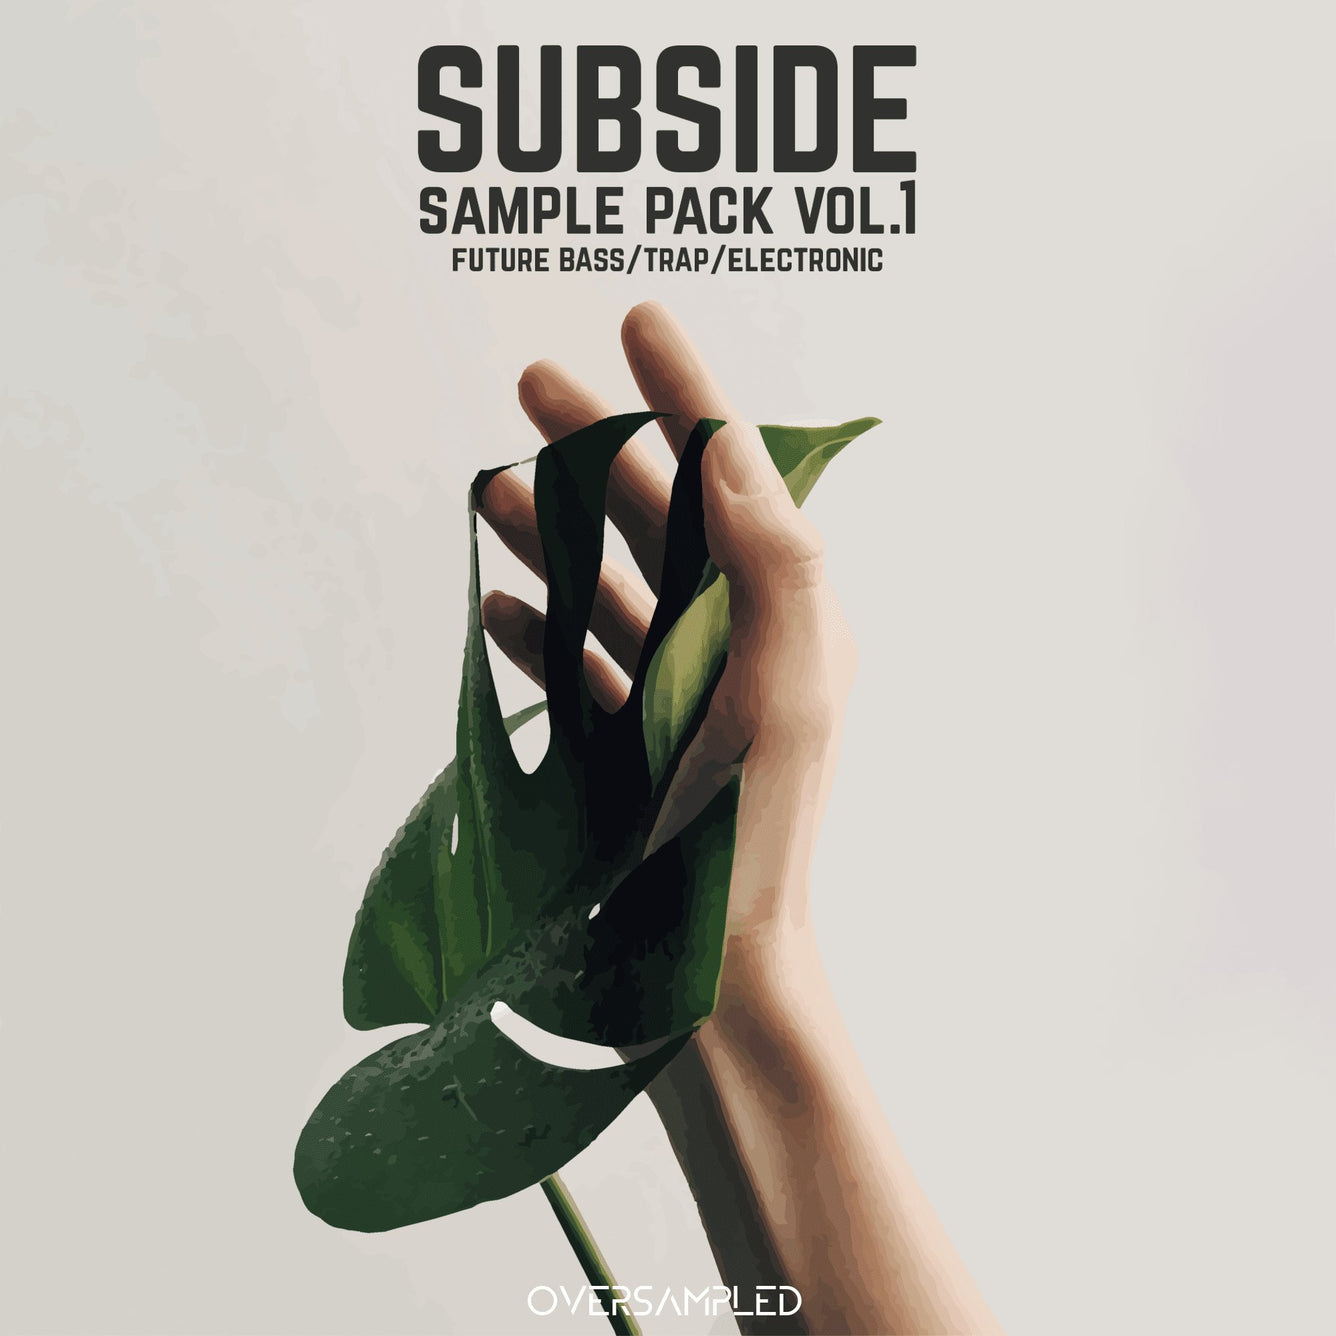 Subside Sample Pack Vol.1 [future bass/trap/electronic] - Oversampled